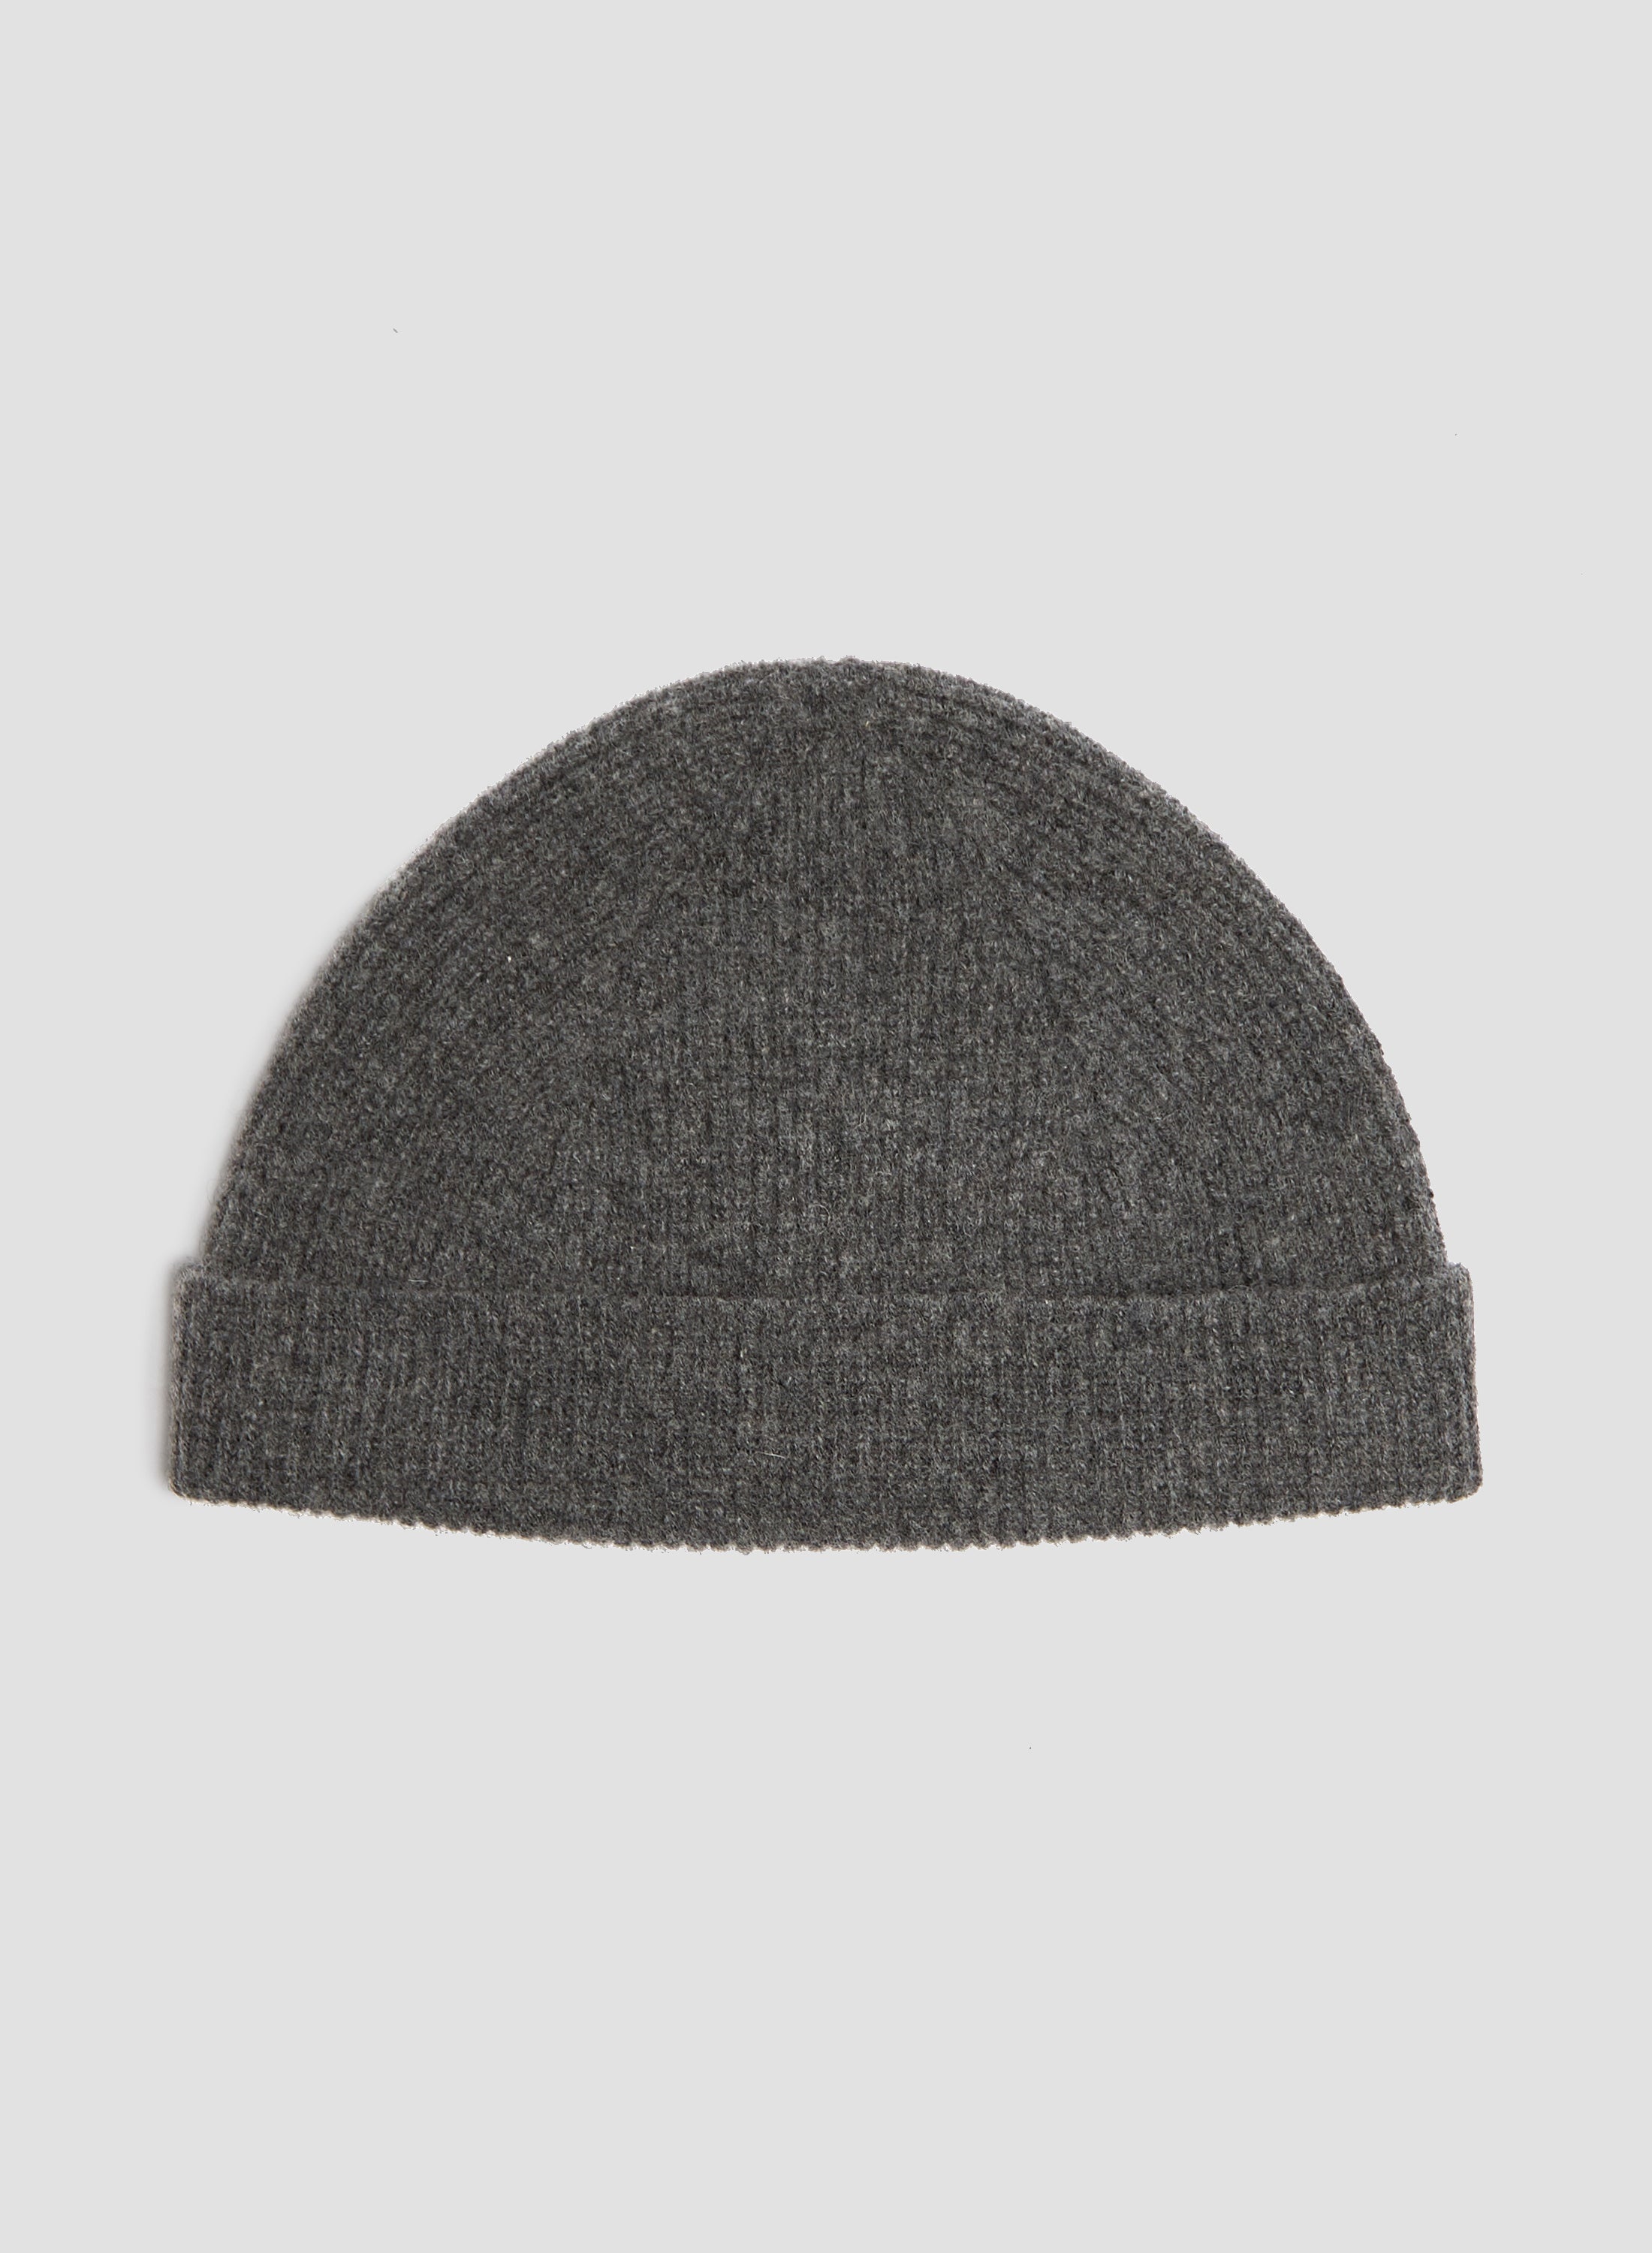 Lambswool Beanie in Cliff Grey - 2